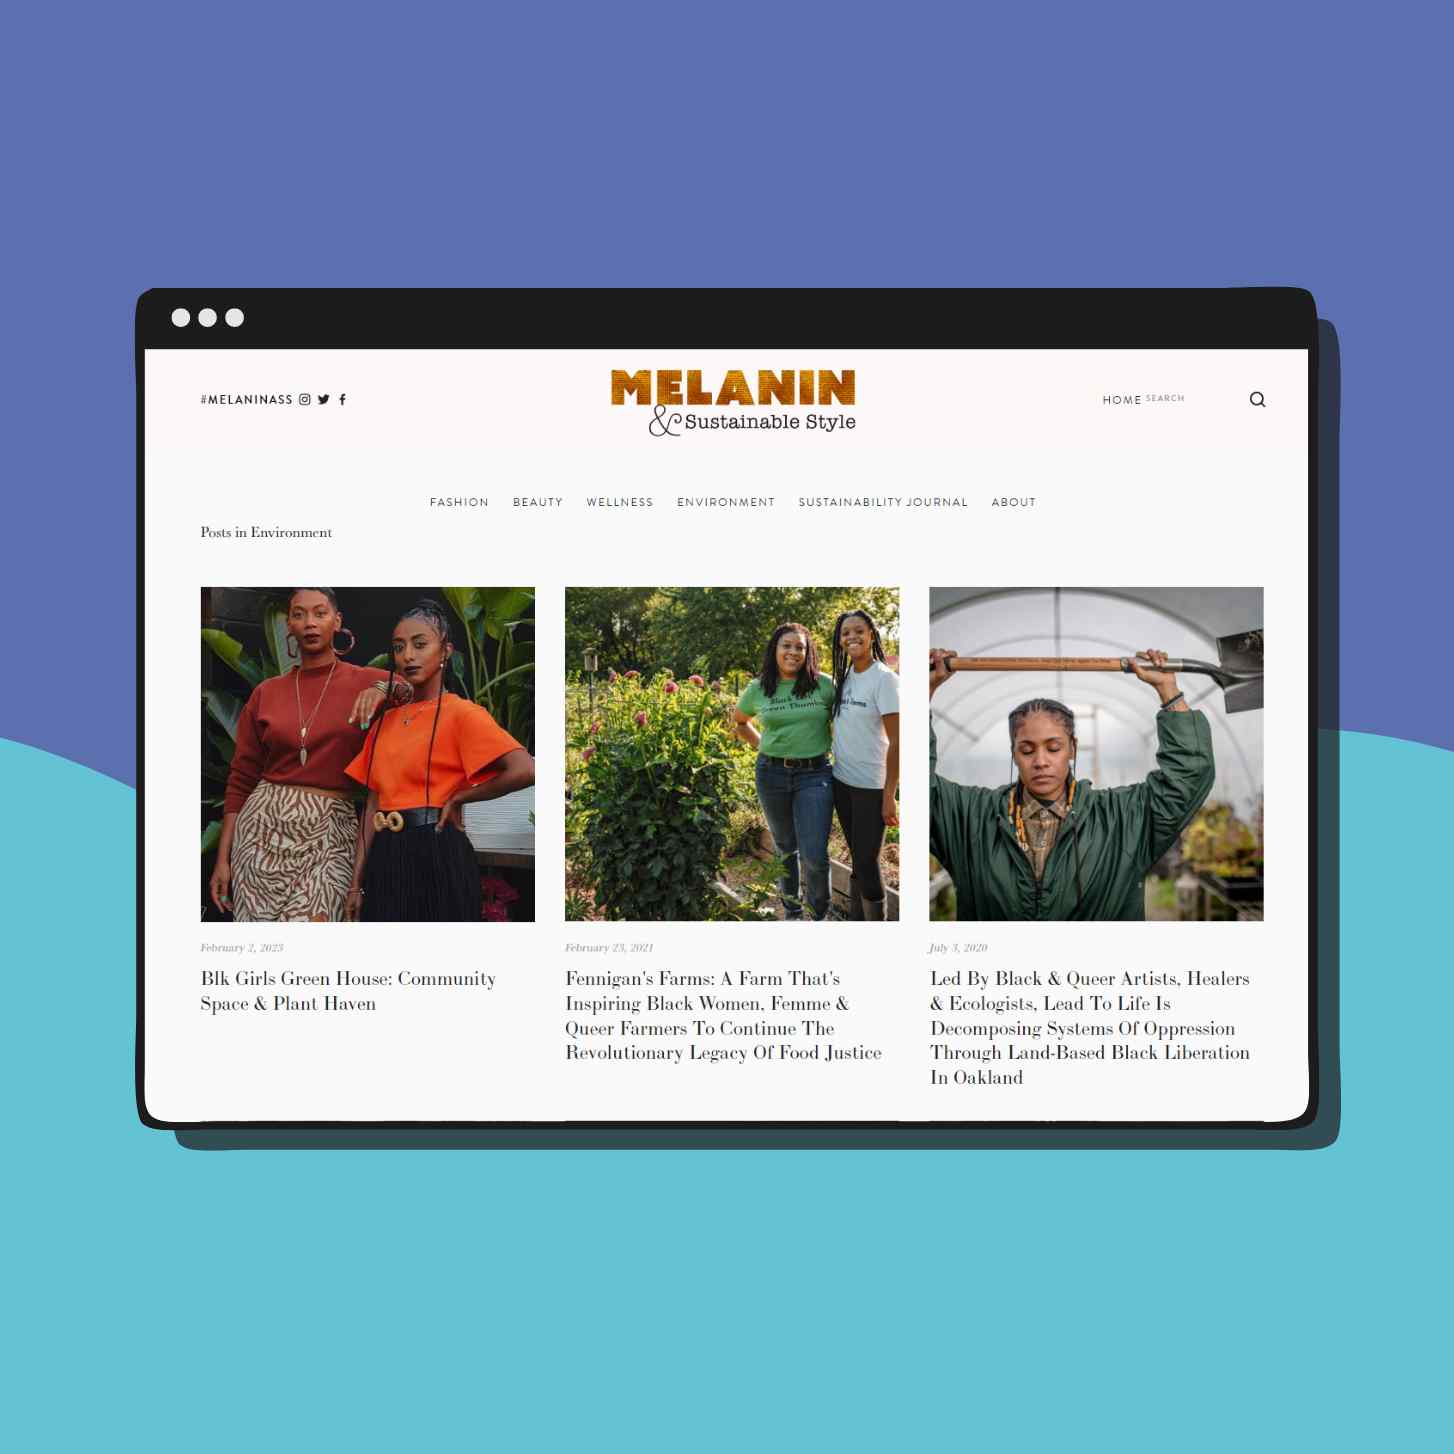 Homepage of Melanin Showcasing Their Featured Environment Articles